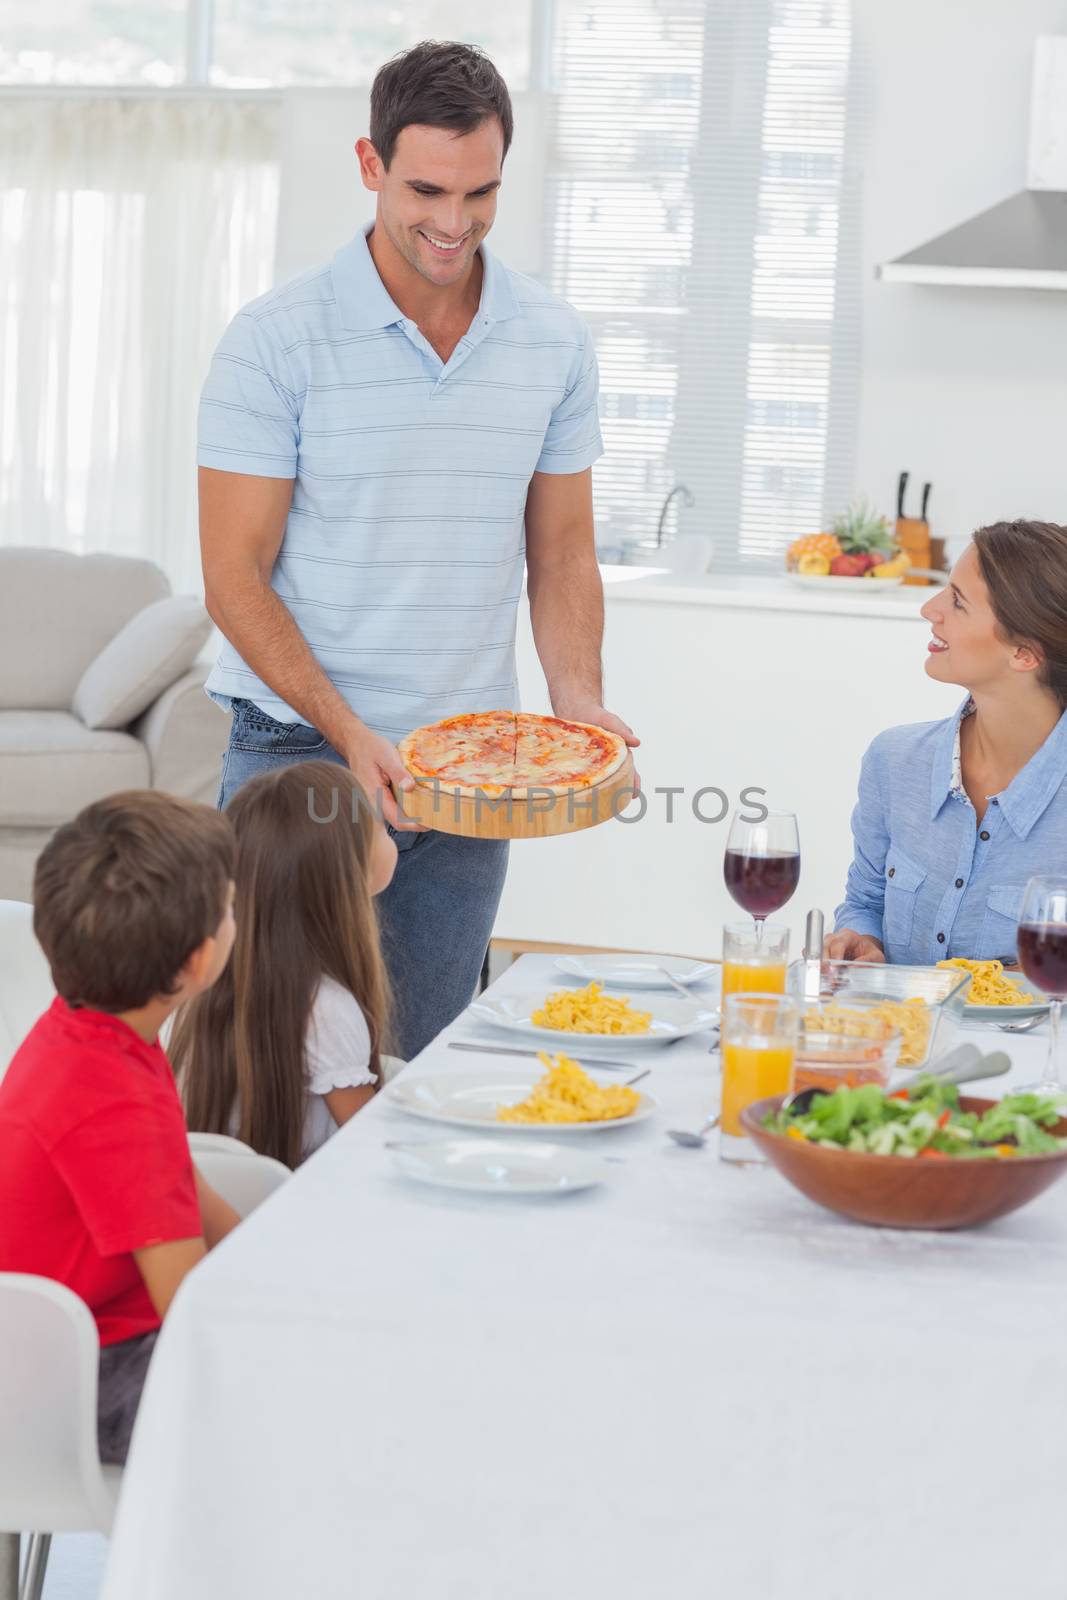 Man bringing a pizza to his family for the dinner